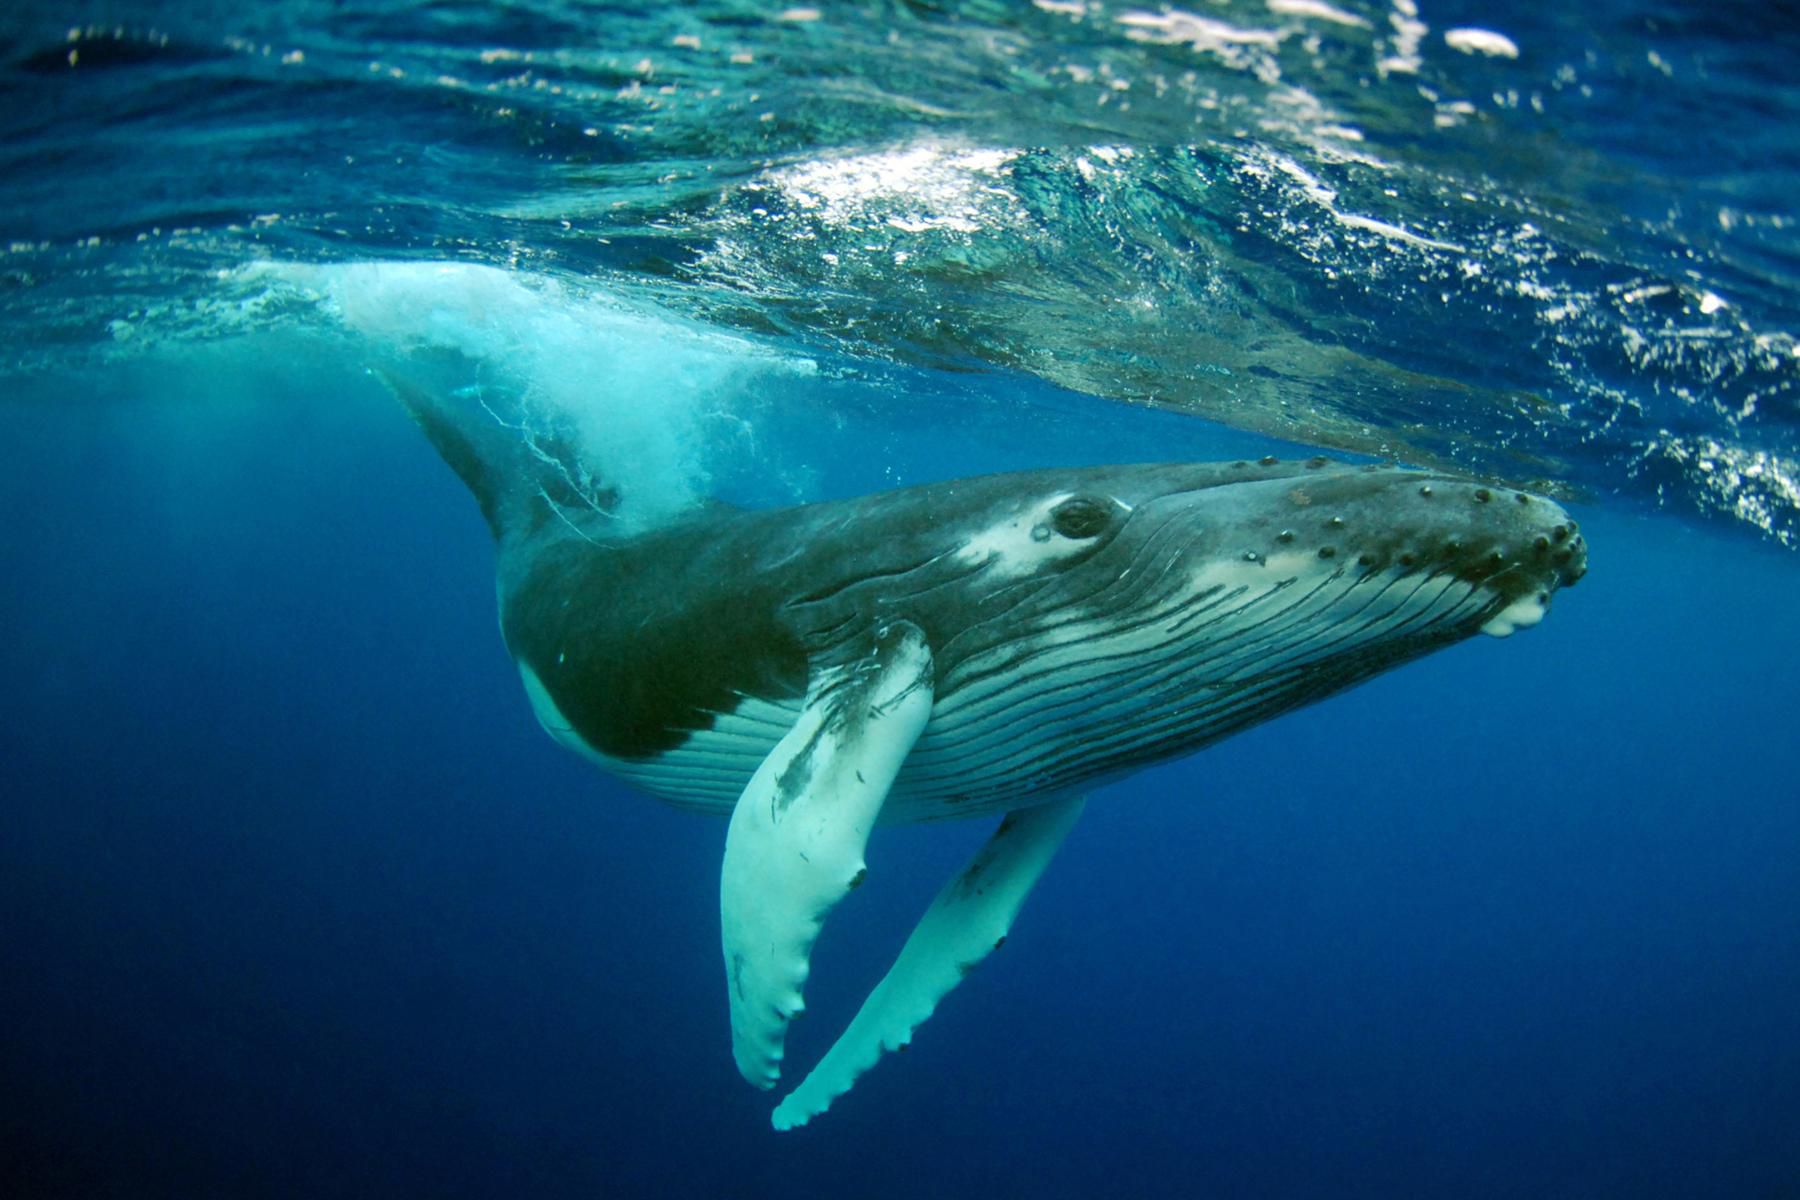 Why is a whale classified as a mammal?